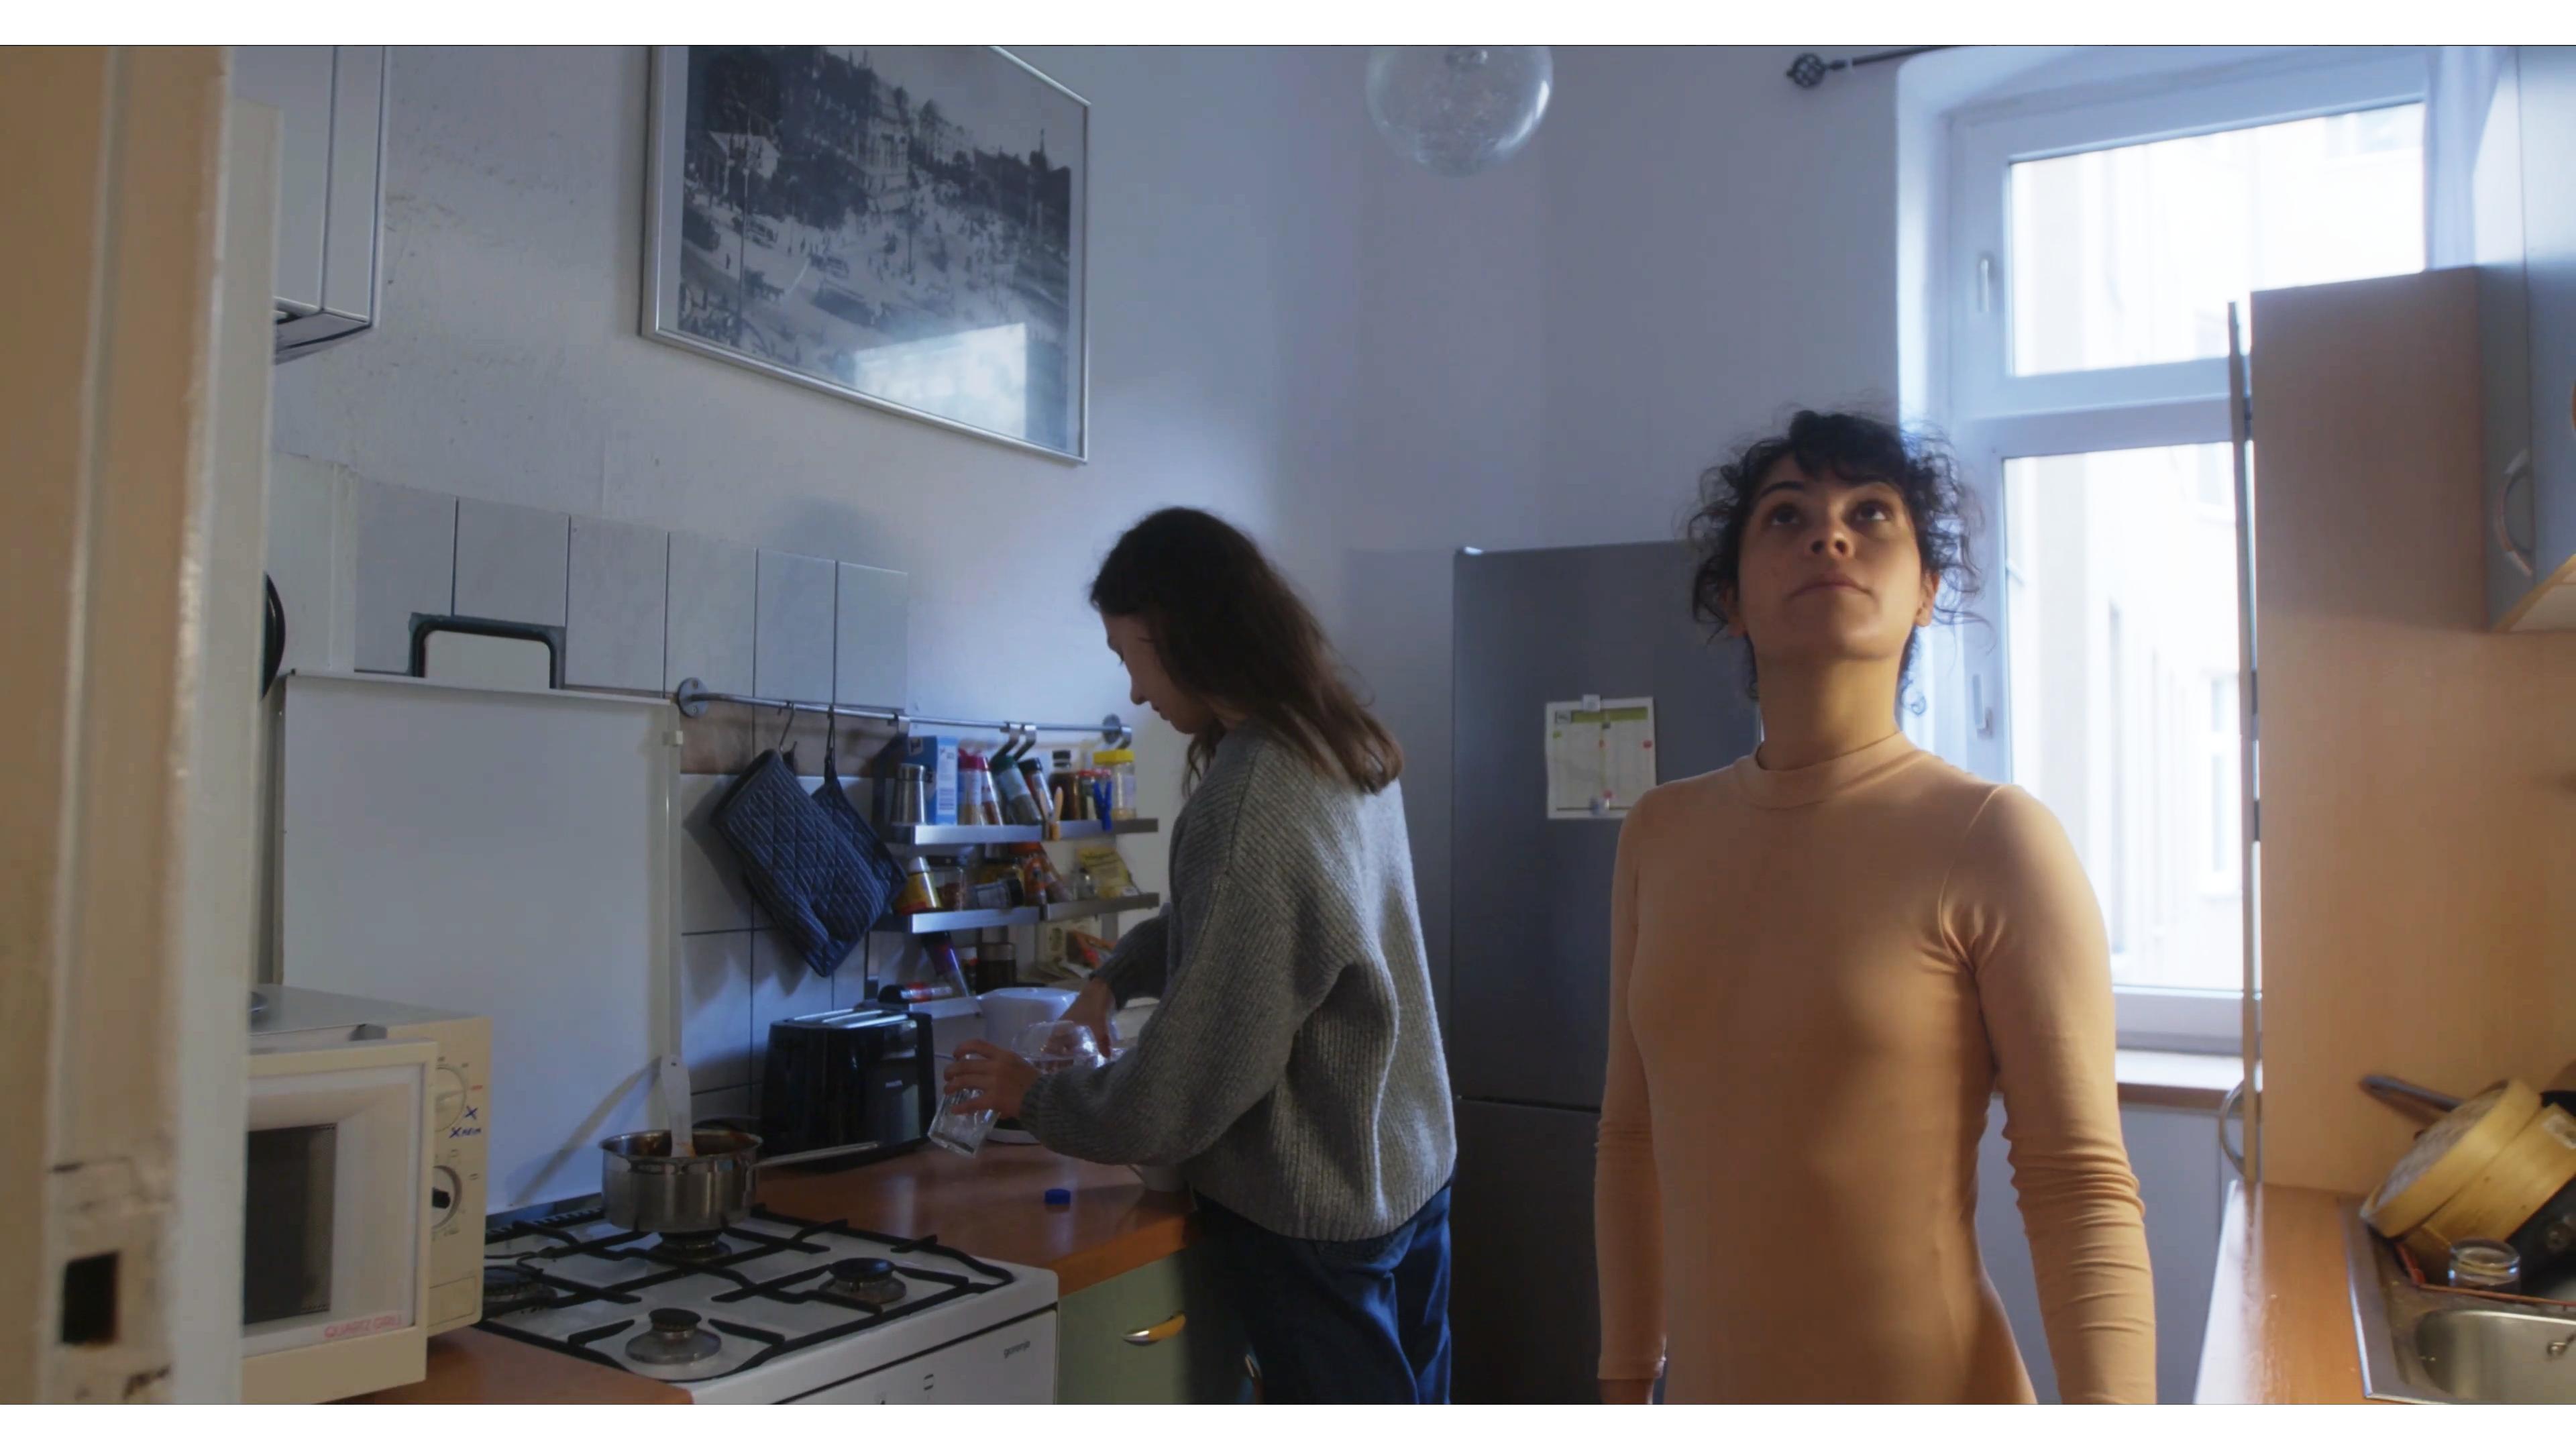 still image from the short firlm, 2 women pictured in a kitchen